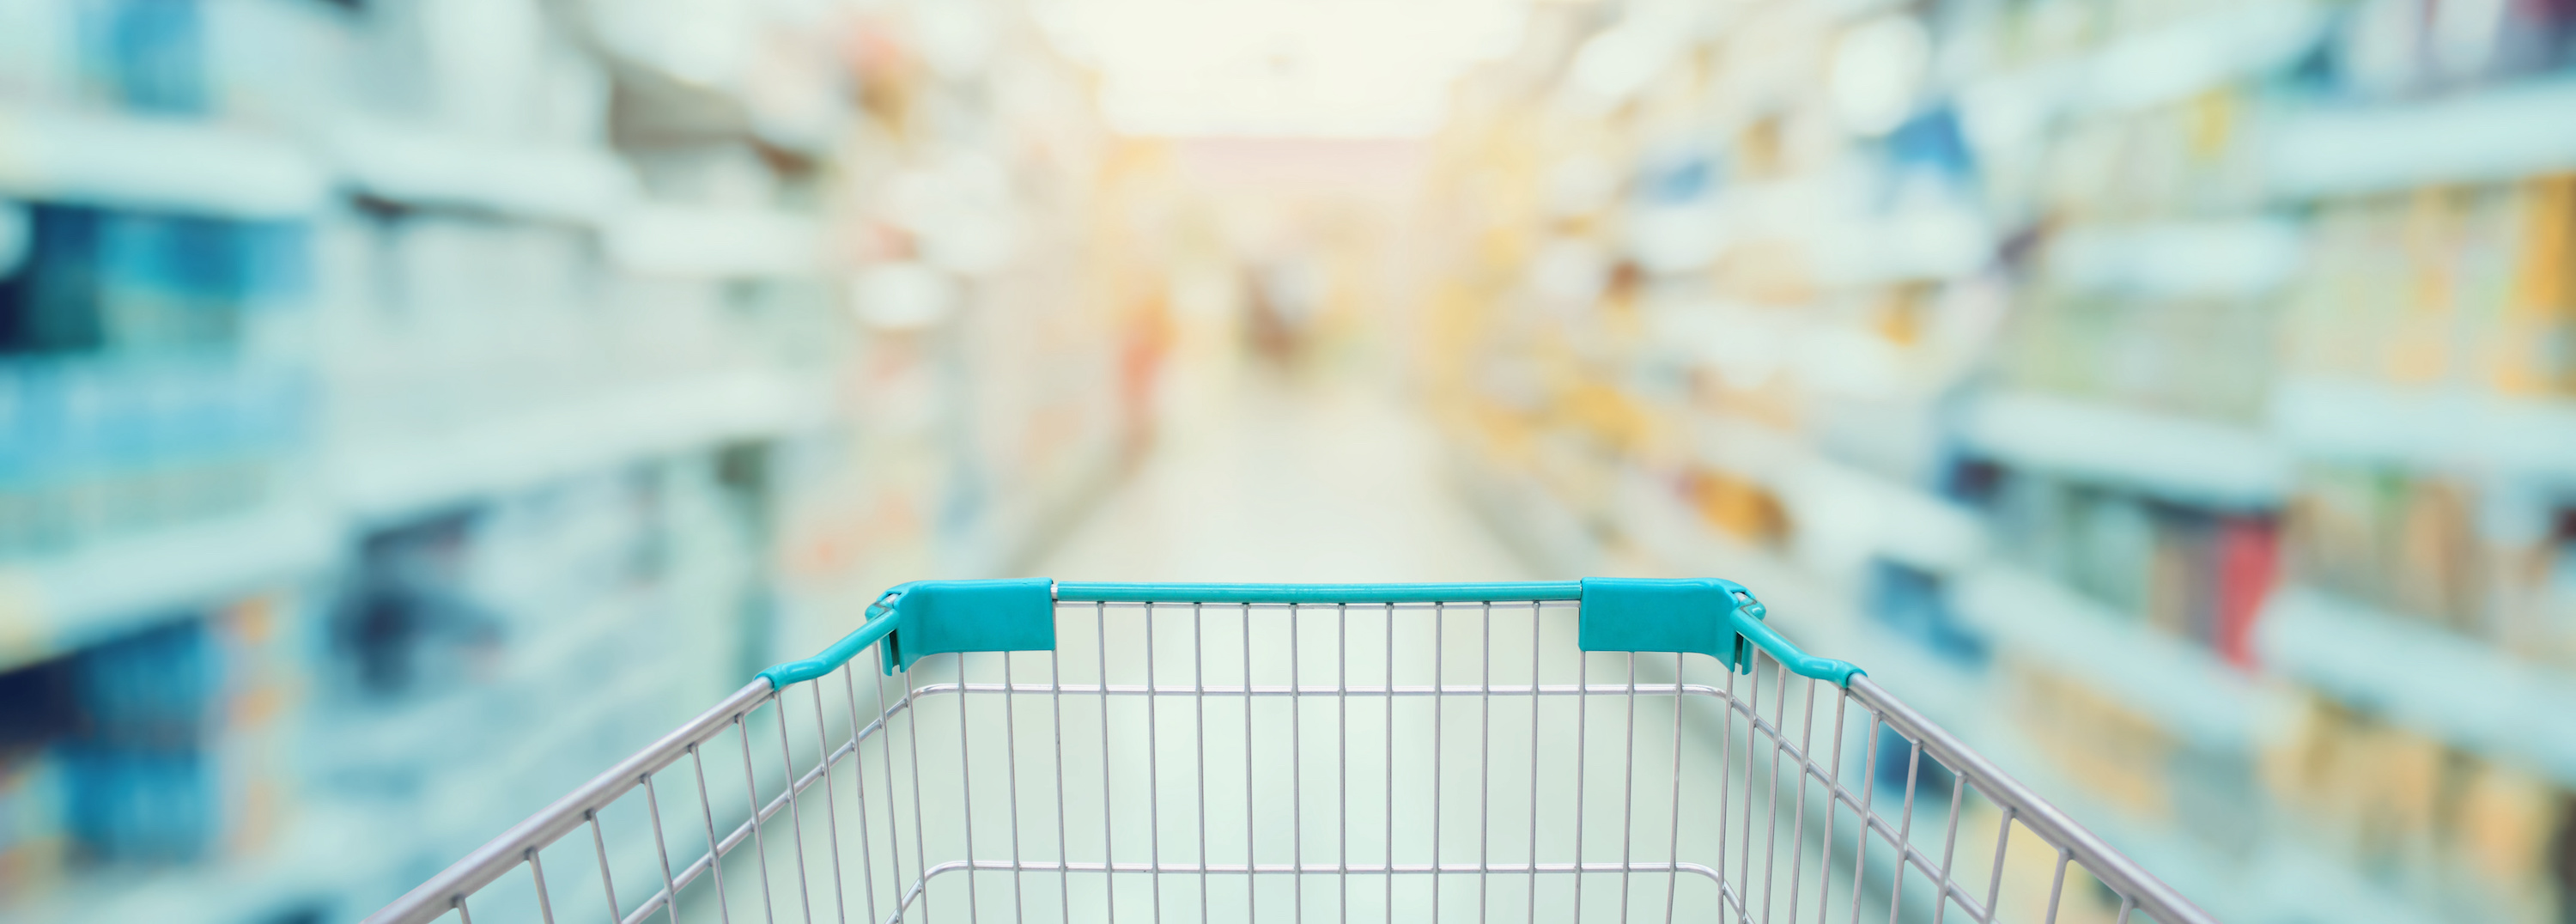 grocery cart moving down a blurred out grocery store aisle 